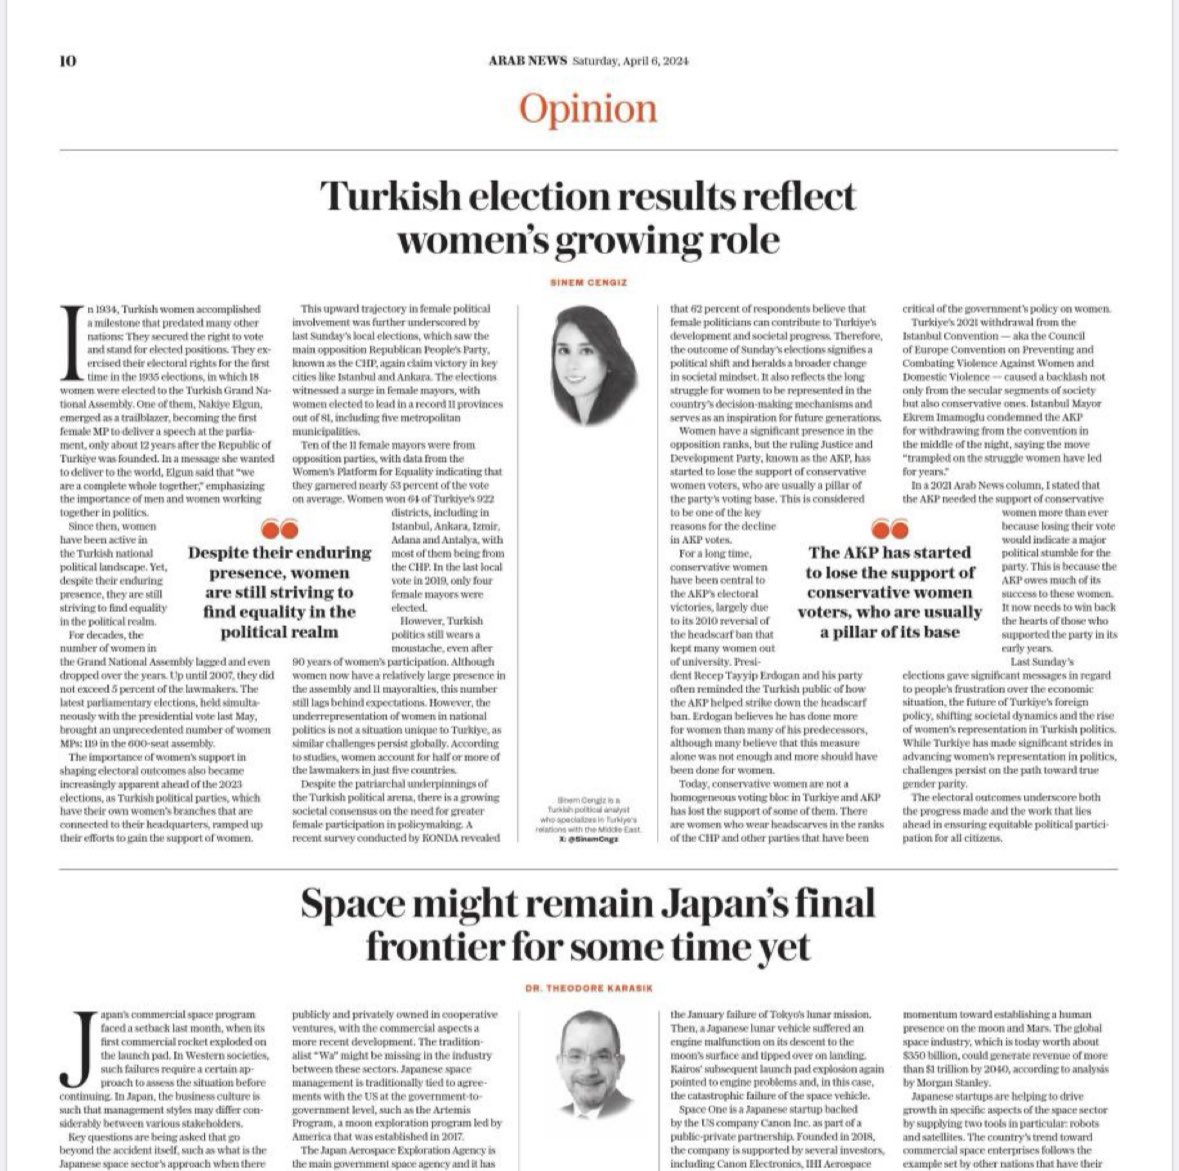 My column this week - at the front page of @arabnews - is on #Turkey’s recent electoral outcome, #women’s increasing role in politics, and shifting societal mindset on women’s representation in Turkish politics that still wears a ‘moustache.’ Link of the article quoted below🗳️🇹🇷